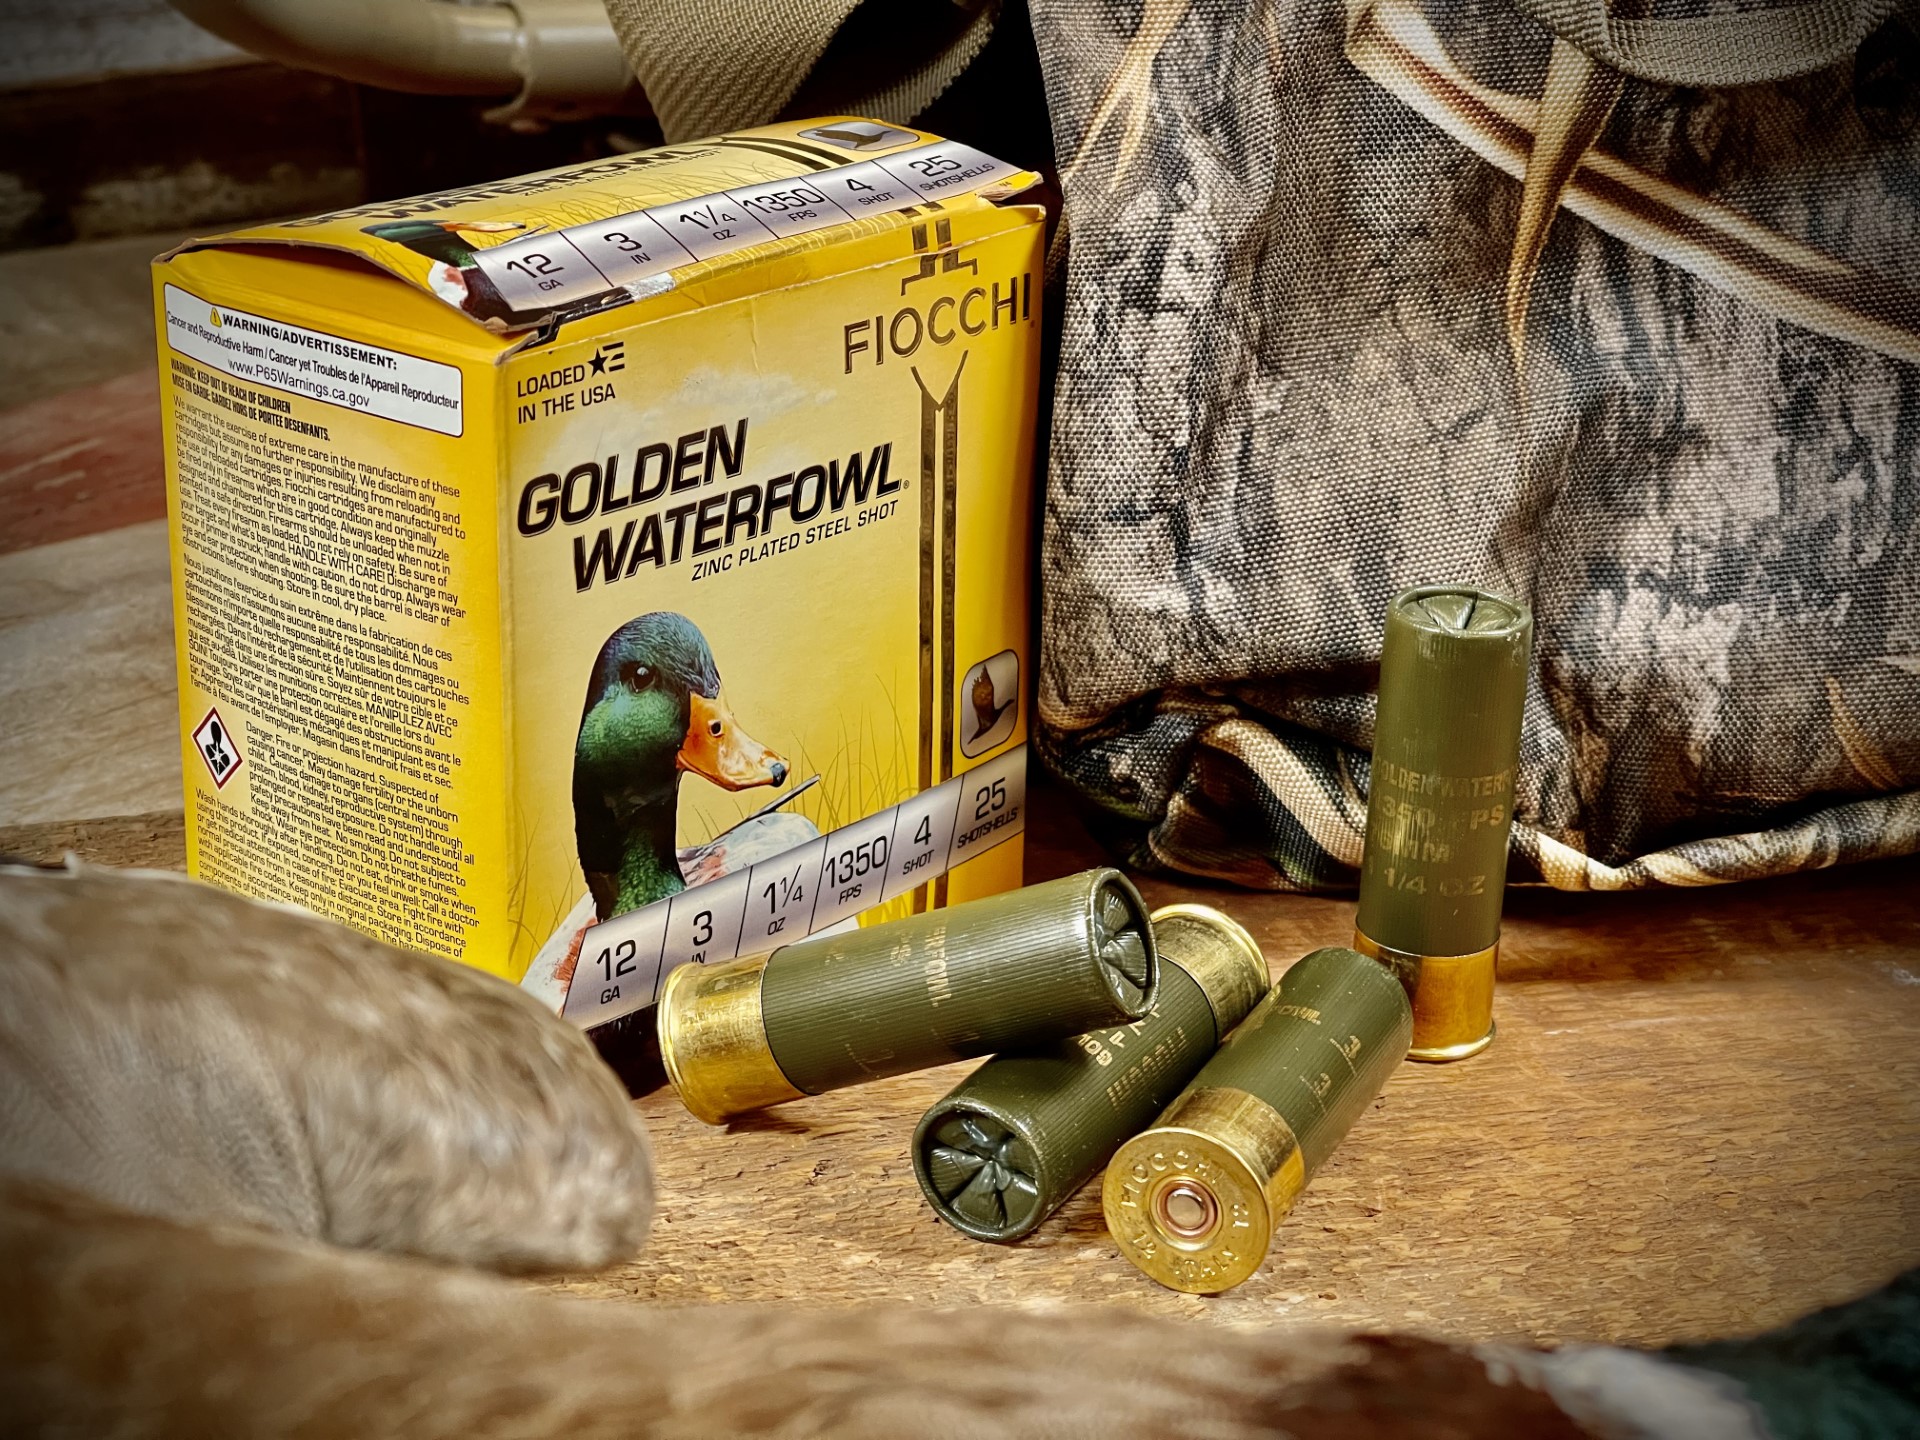 Fiocchi Golden Waterfowl – Tested True